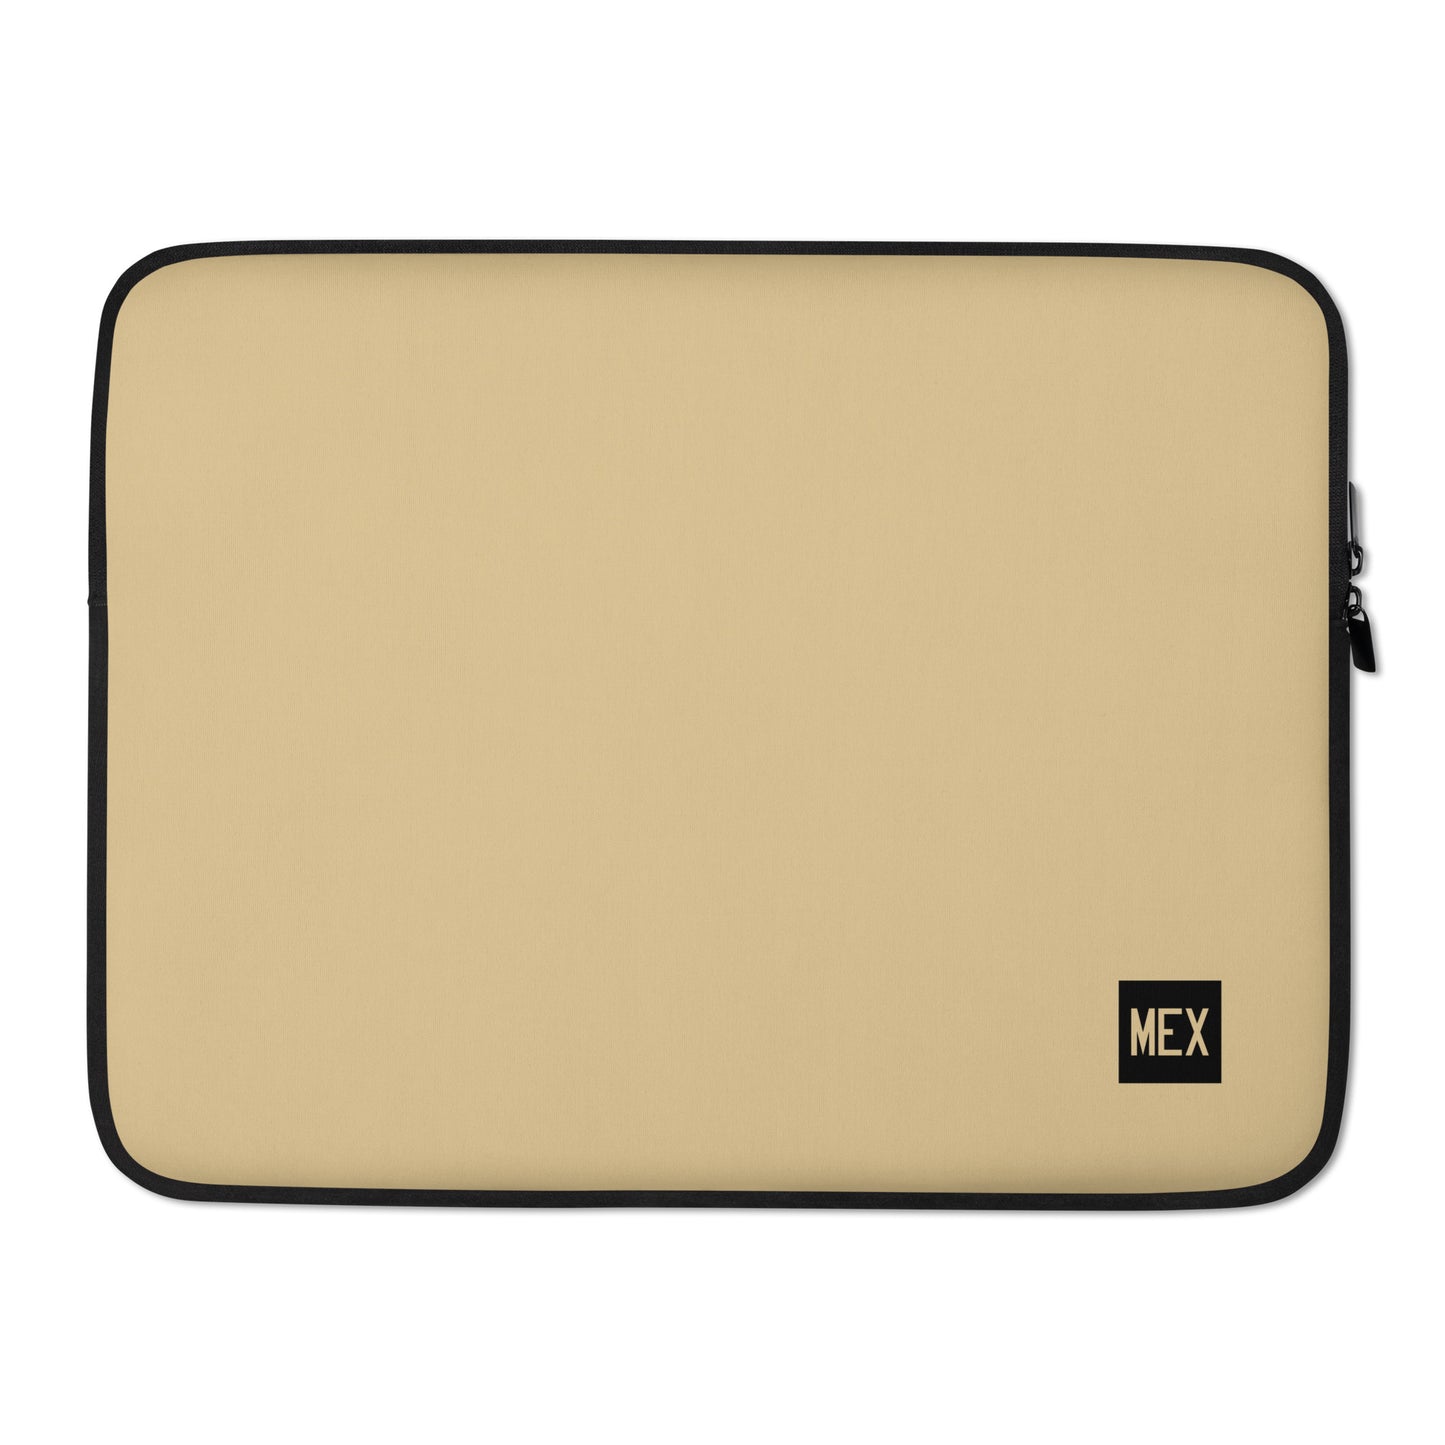 Aviation Gift Laptop Sleeve - Light Brown • MEX Mexico City • YHM Designs - Image 02